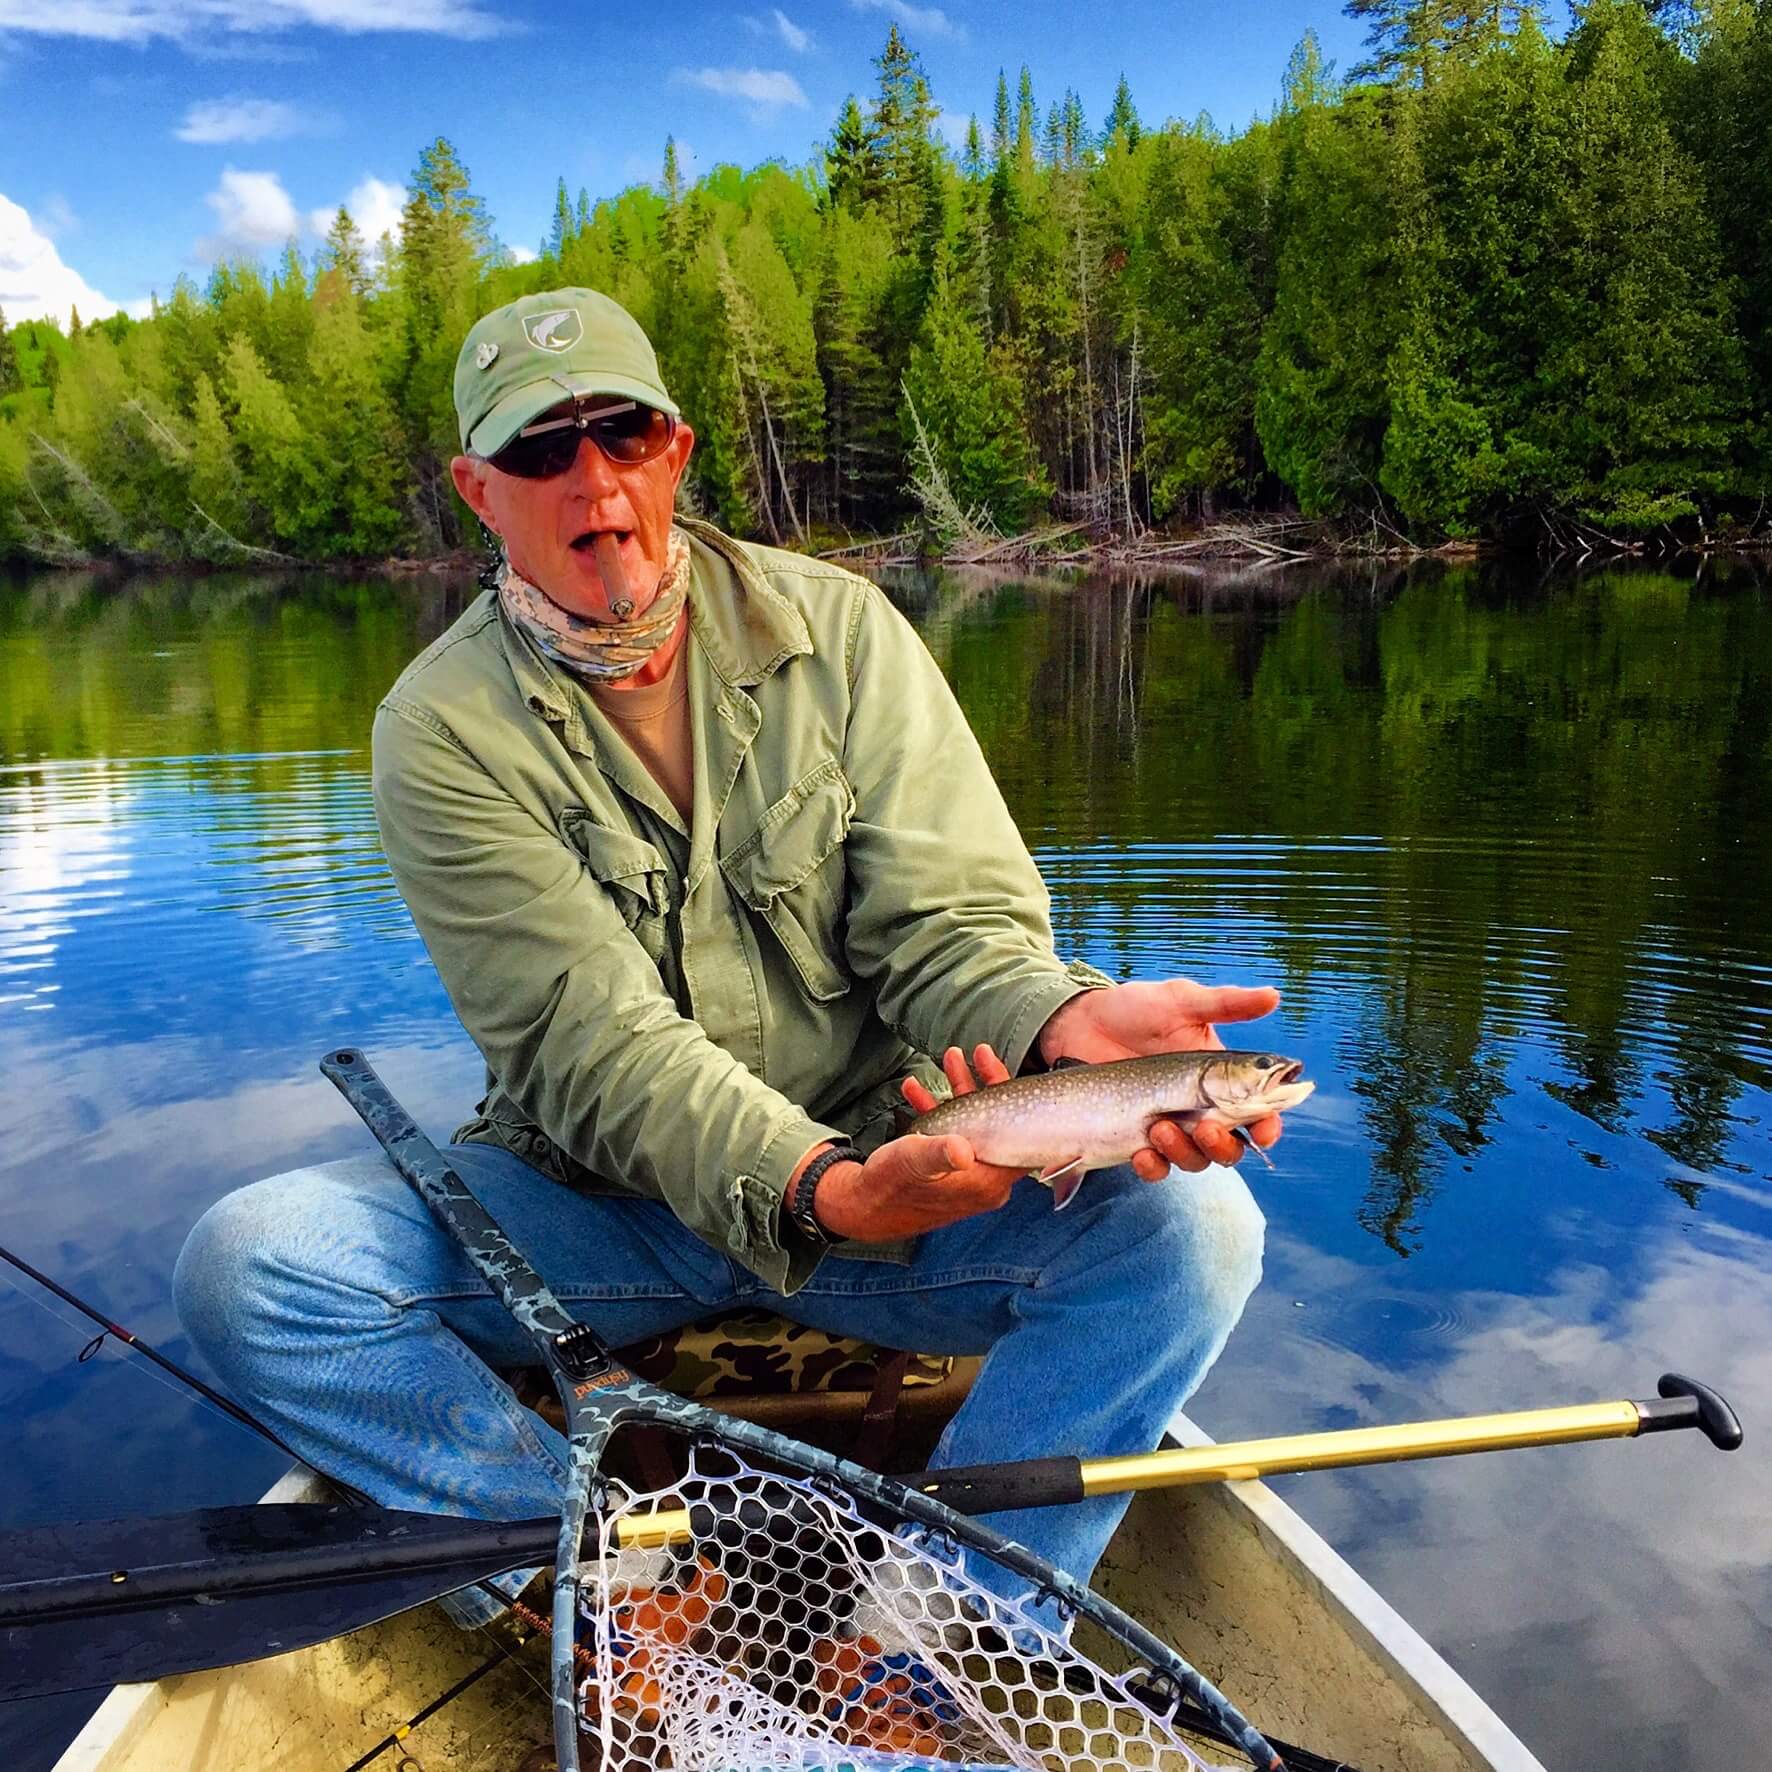 How to Make a Fly Fishing Leader? - Guide Recommended